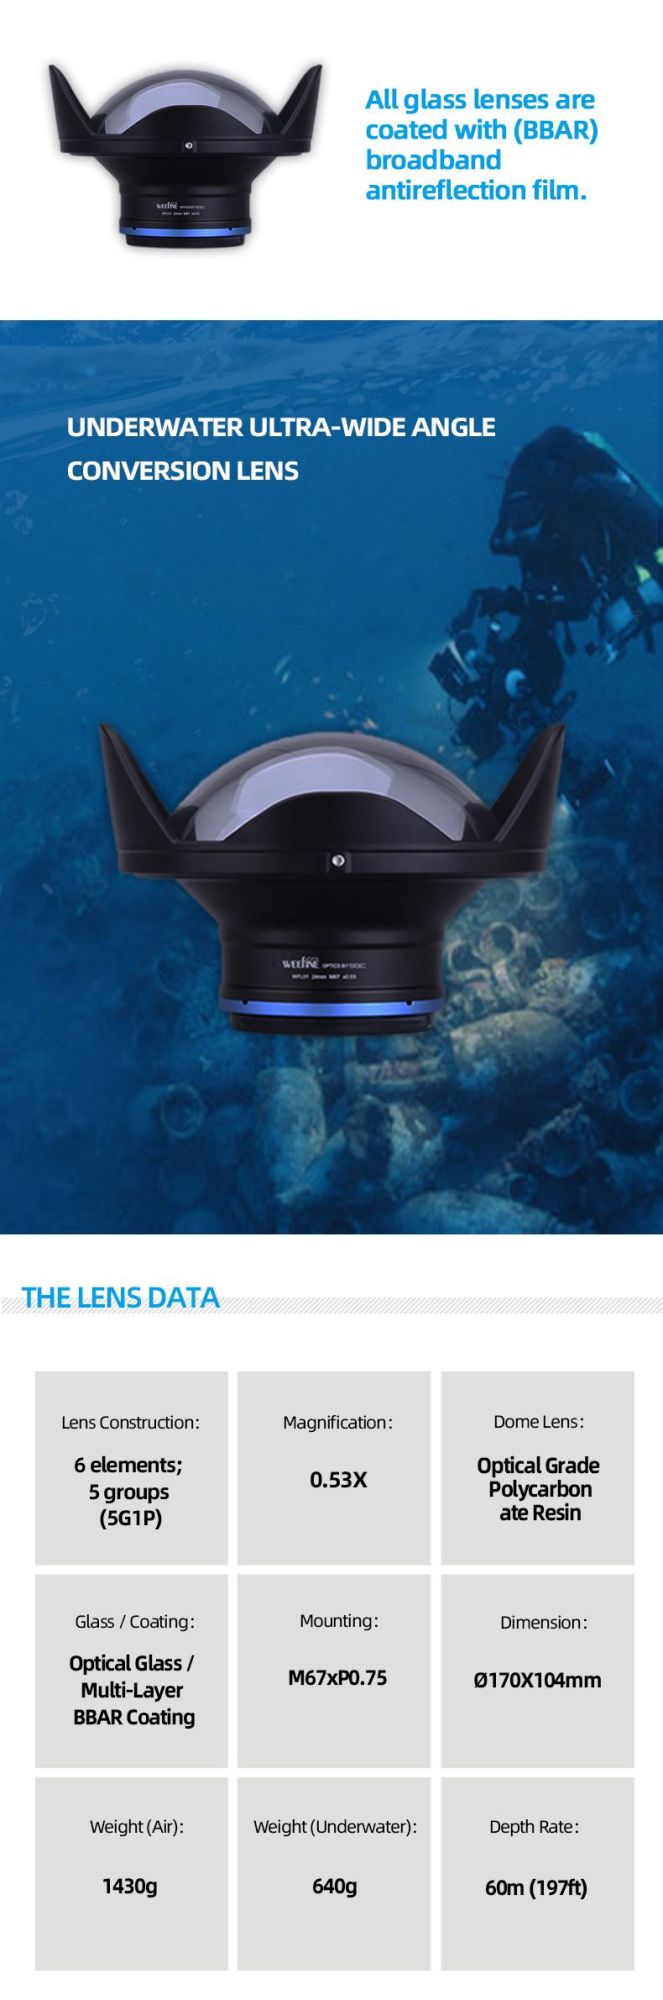 The Diving Equipment Lens for Taking Photos of Tiny Objects